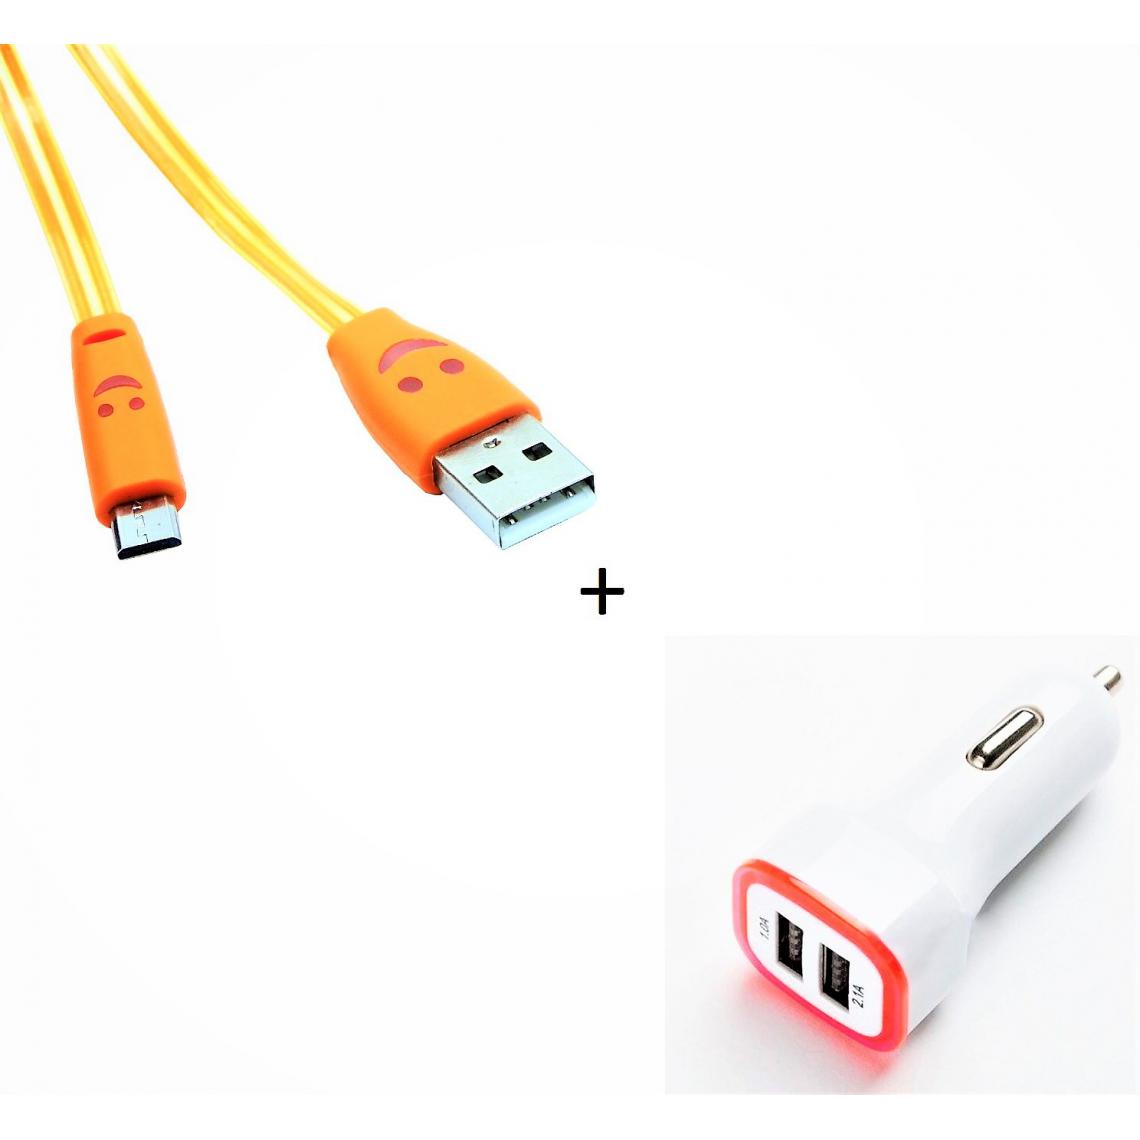 Shot - Pack Chargeur Voiture pour "WIKO Y81" Smartphone Micro USB (Cable Smiley + Double Adaptateur LED Allume Cigare) (ORANGE) - Chargeur Voiture 12V